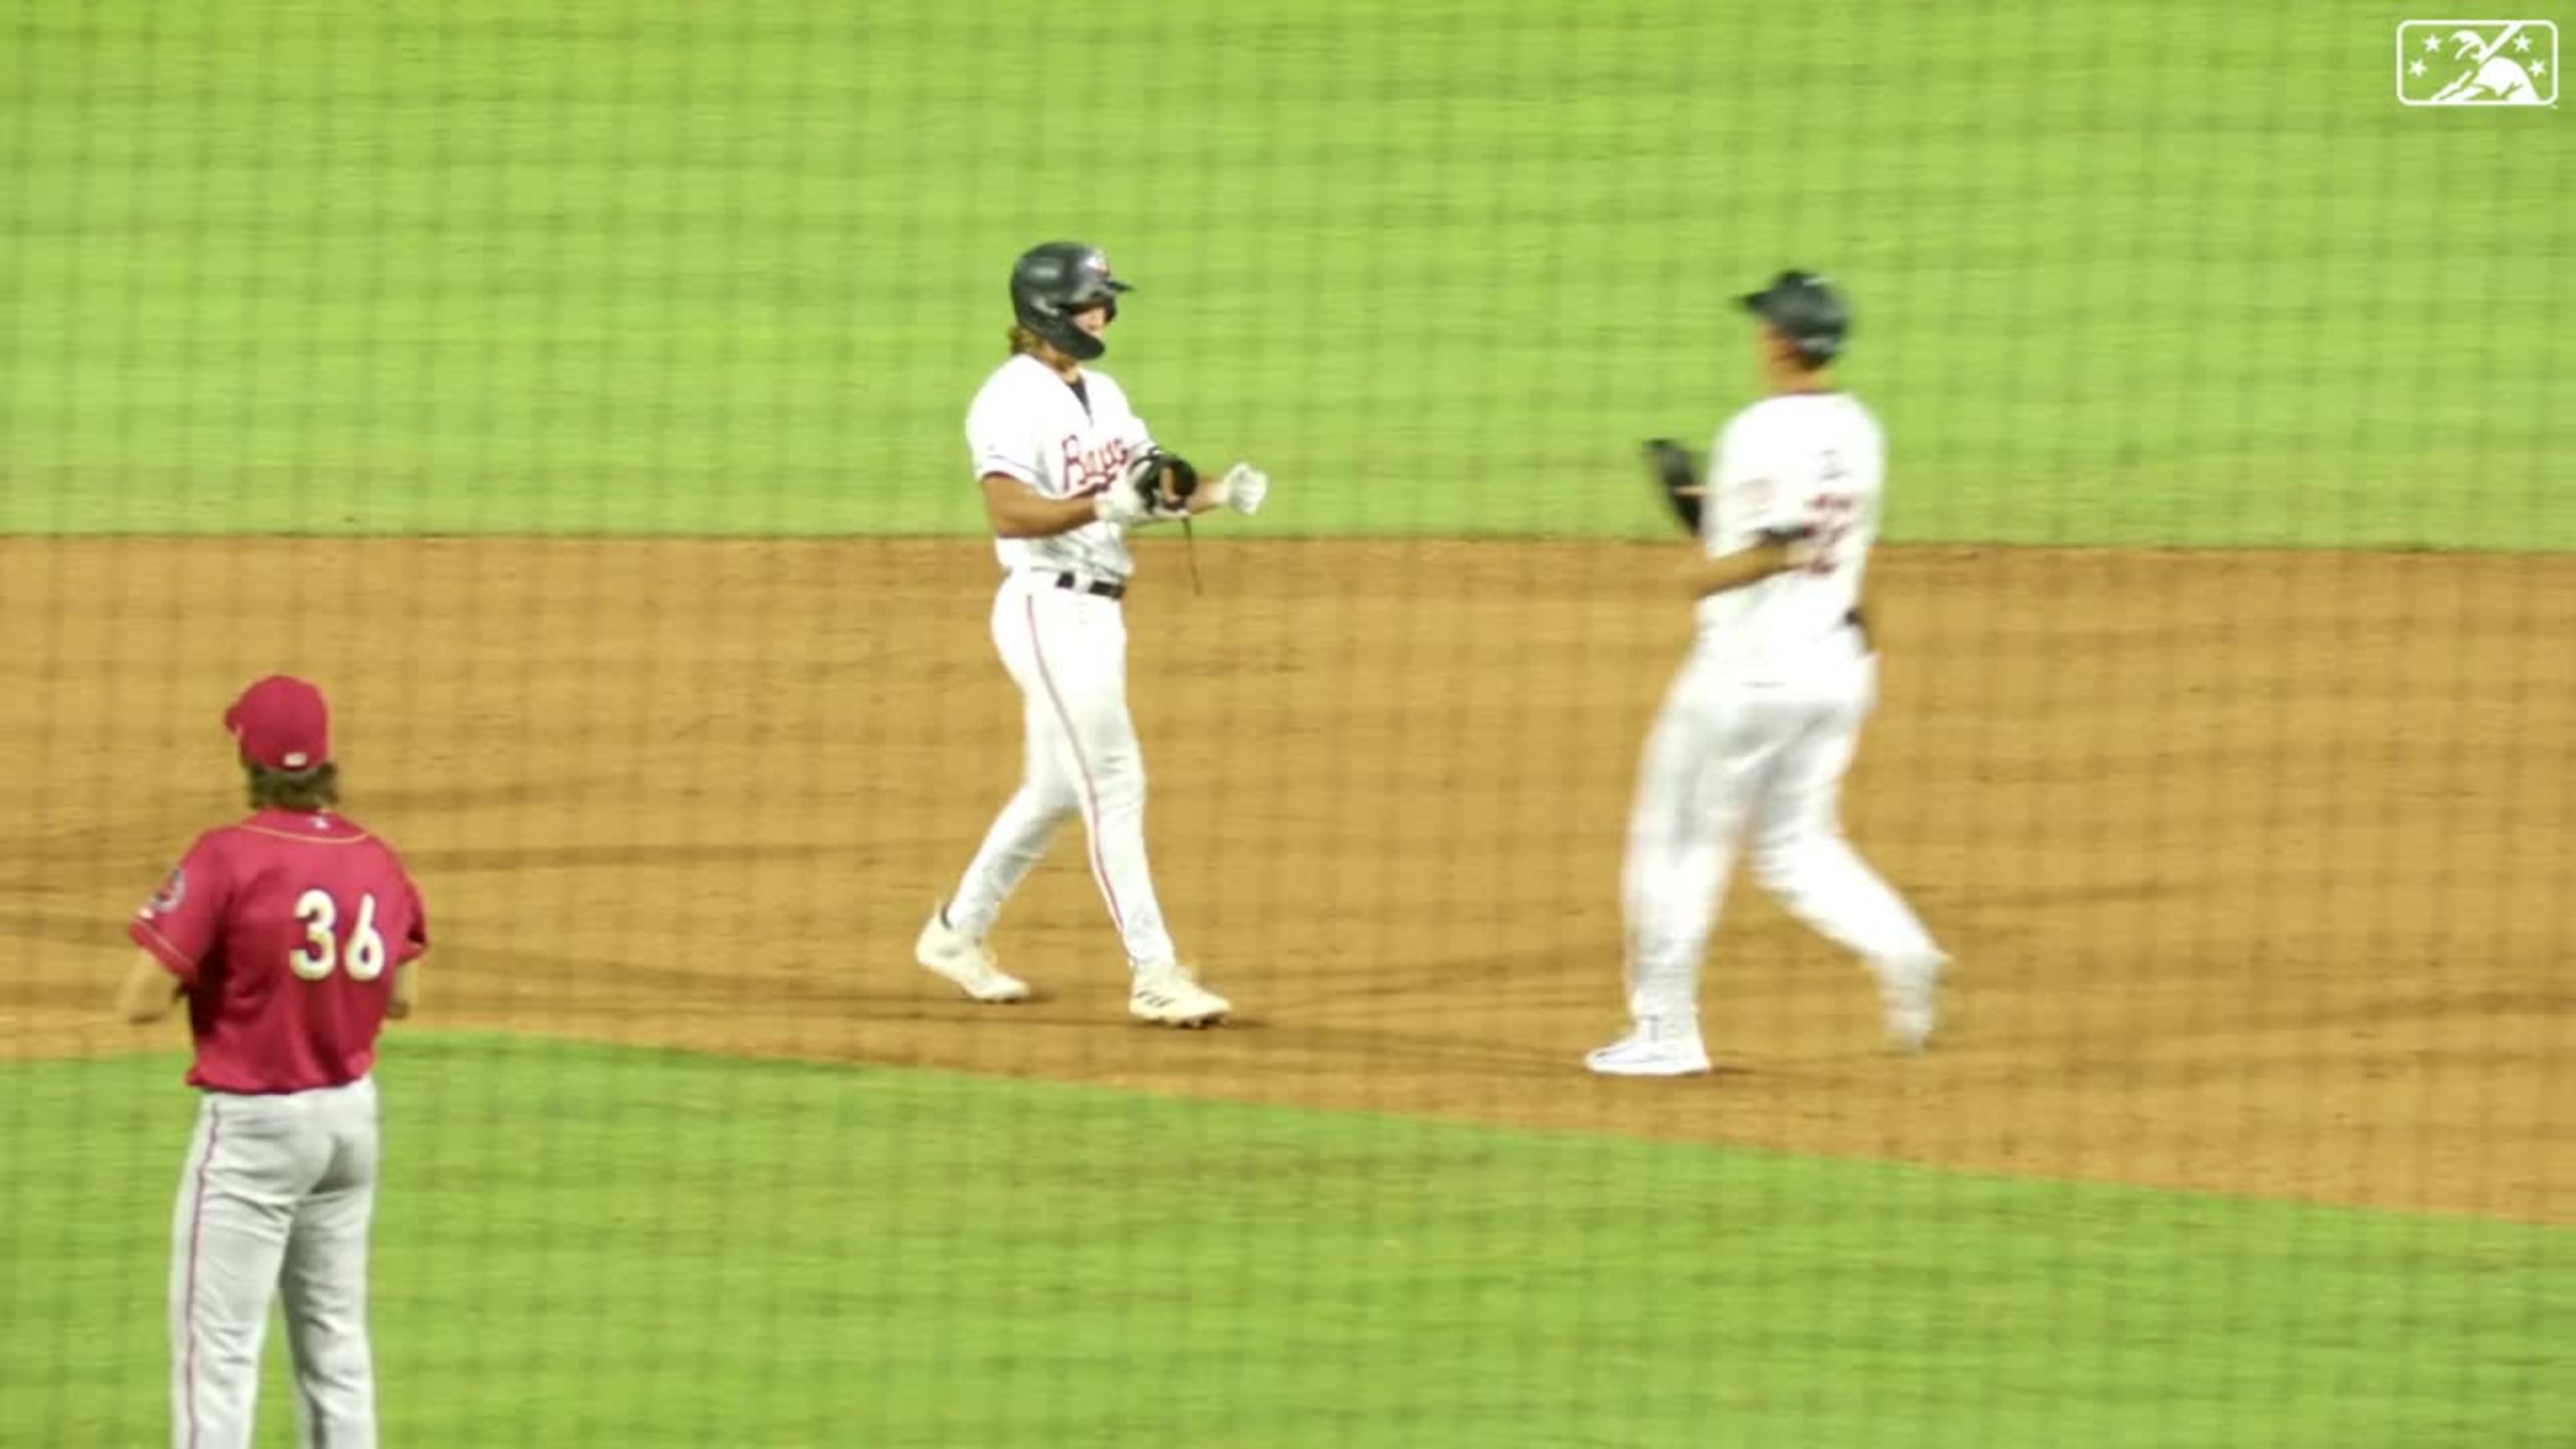 Jackson Holliday has new goals after reaching Double-A with Bowie